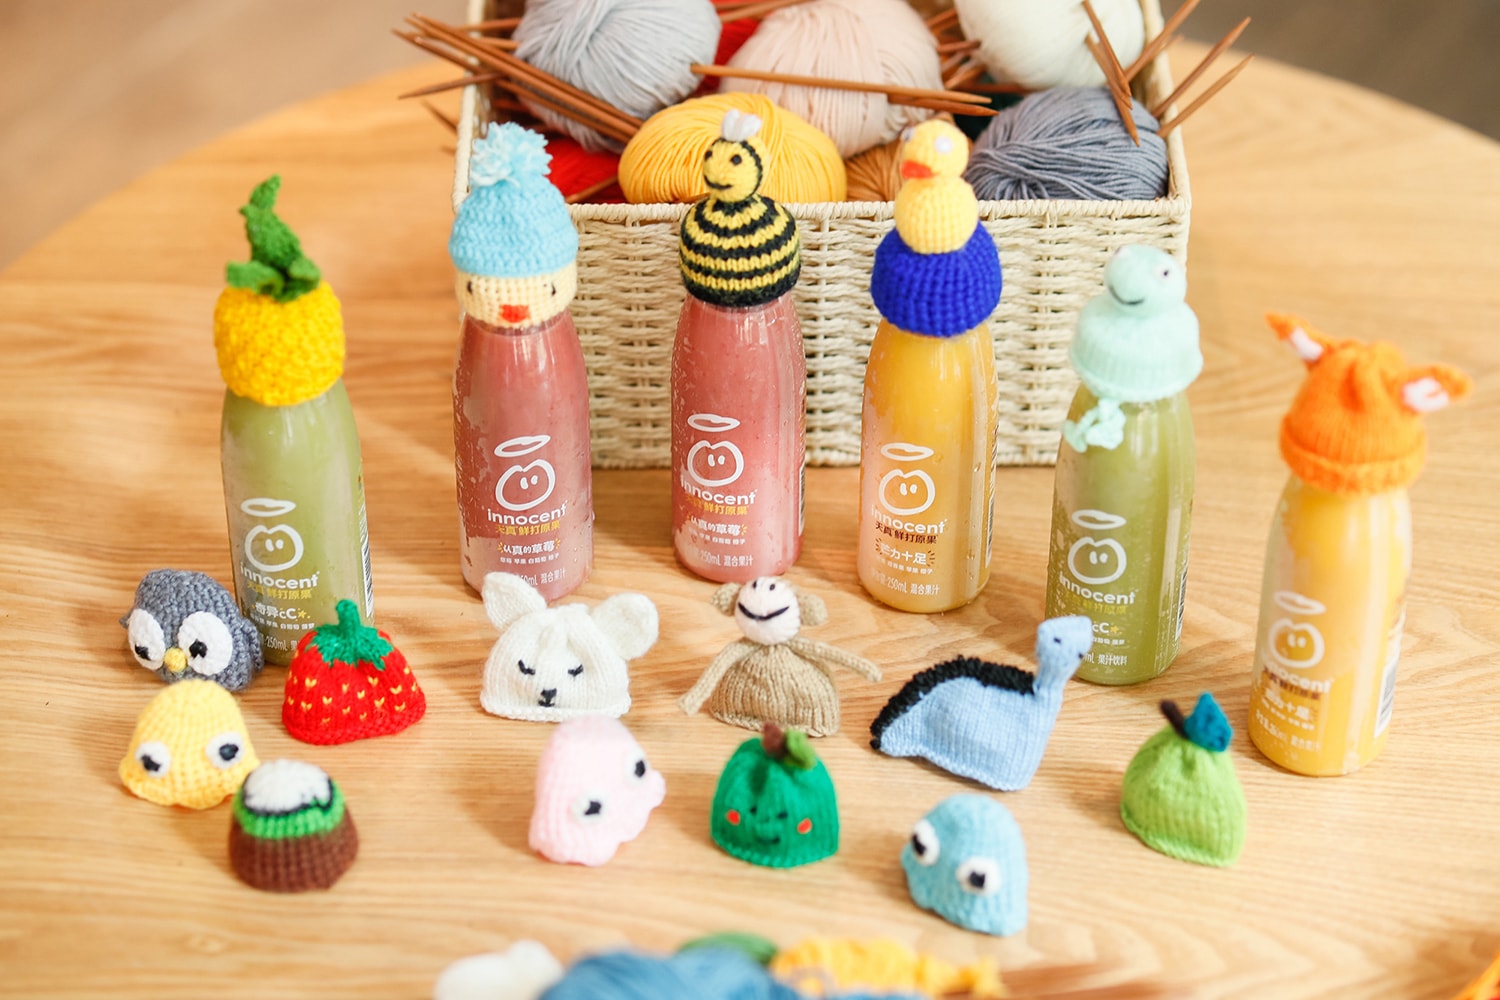 Innocent-smoothie-uk-healthy-juice-arrive-china-Big-Knit-b-corp